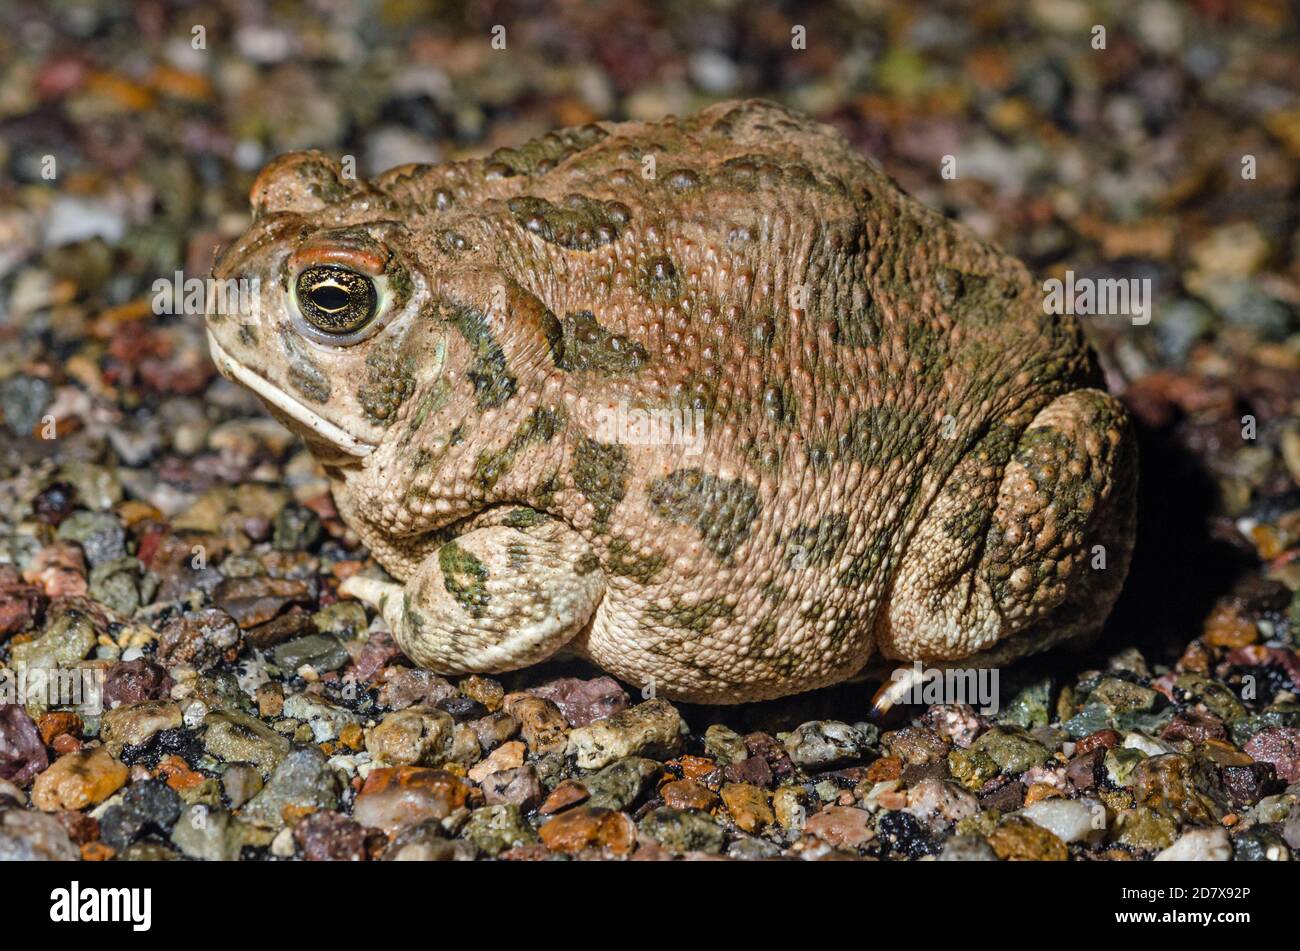 Crapaud de Woodhouse (Anaxyrus woodhousii) Banque D'Images